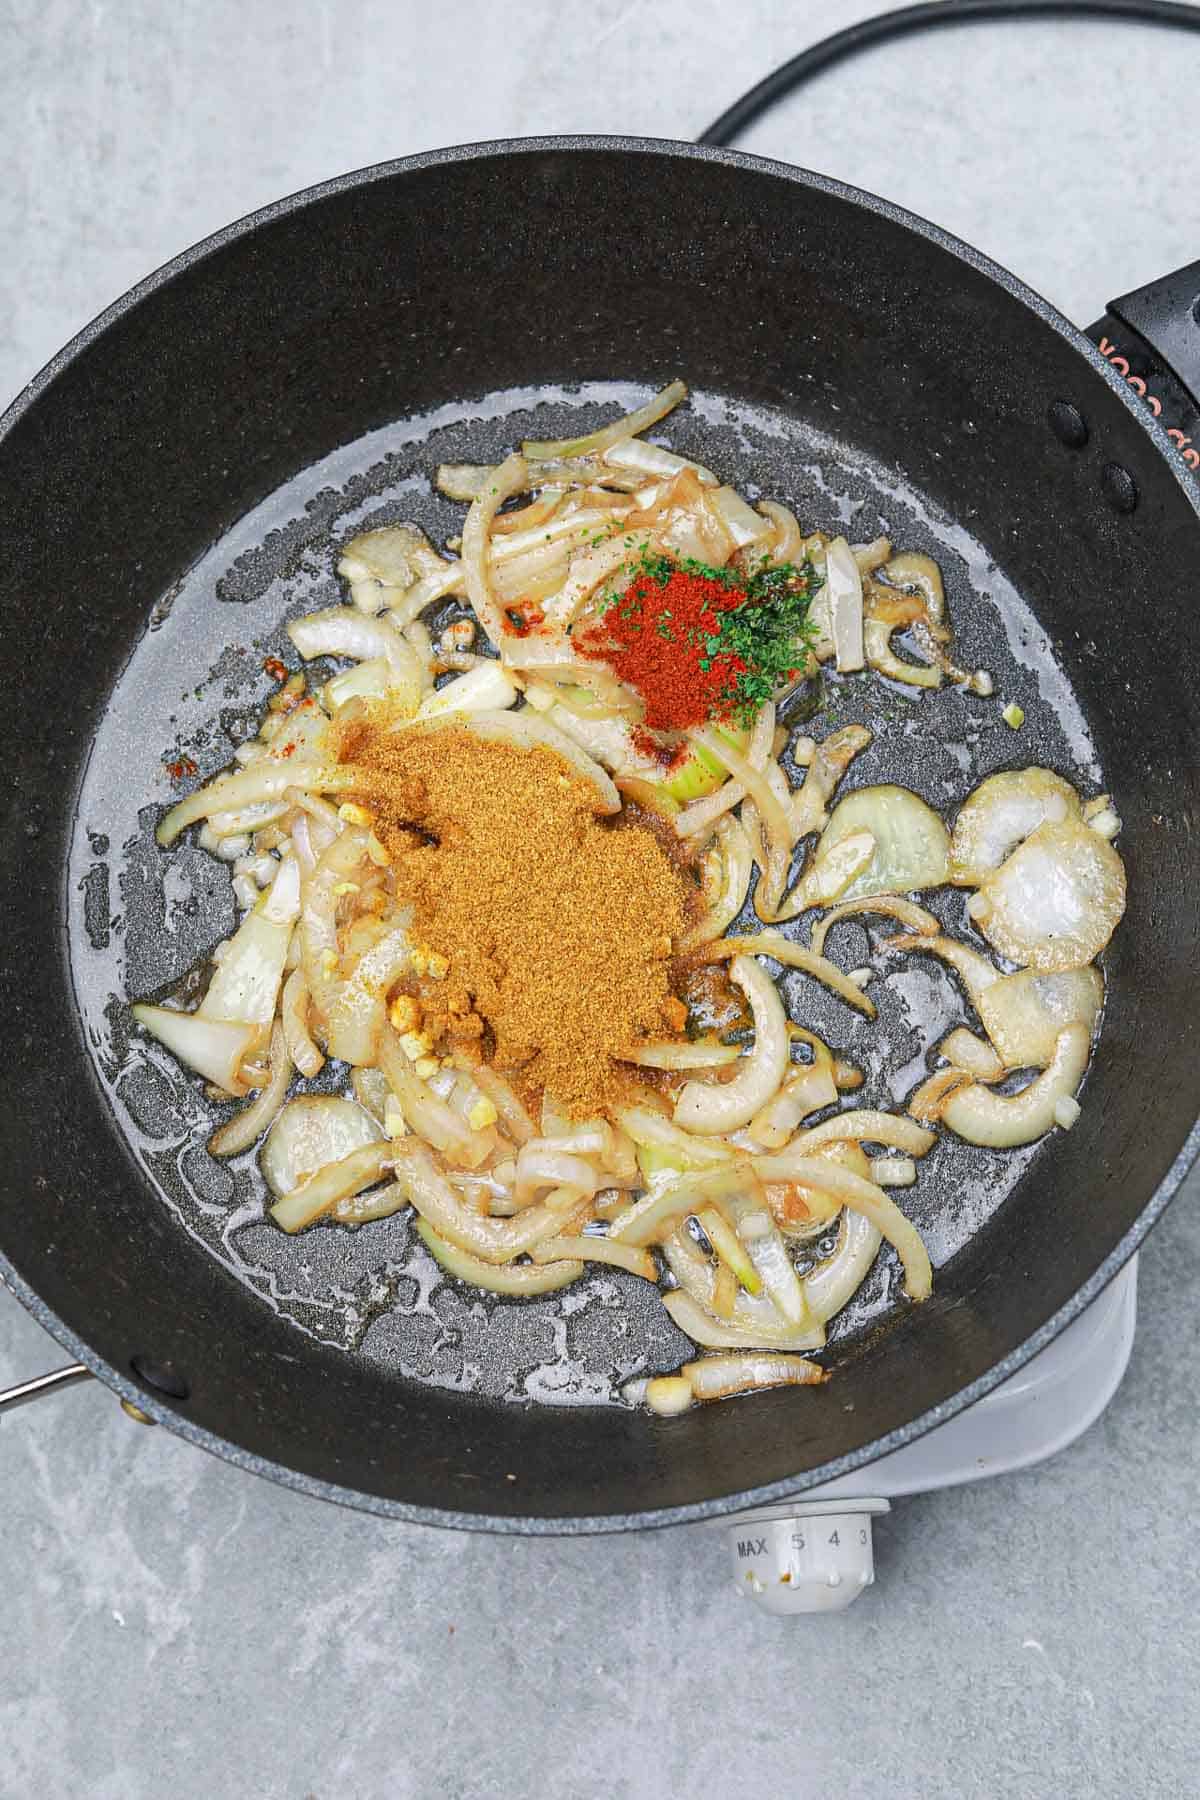 curry powder and other seasonings added to the skillet.